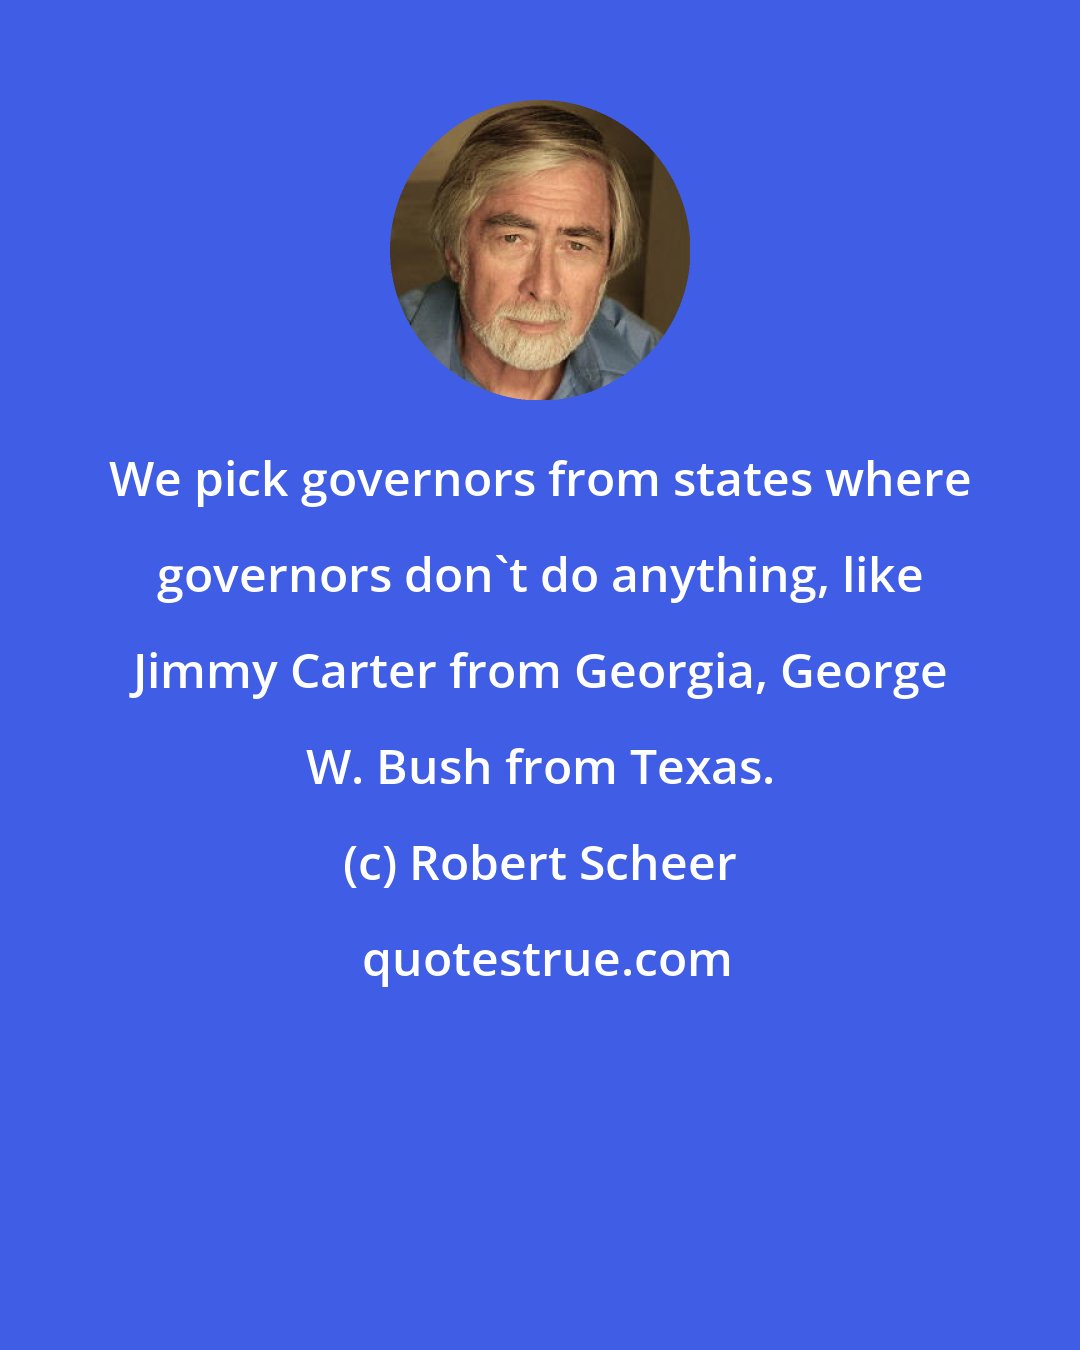 Robert Scheer: We pick governors from states where governors don't do anything, like Jimmy Carter from Georgia, George W. Bush from Texas.